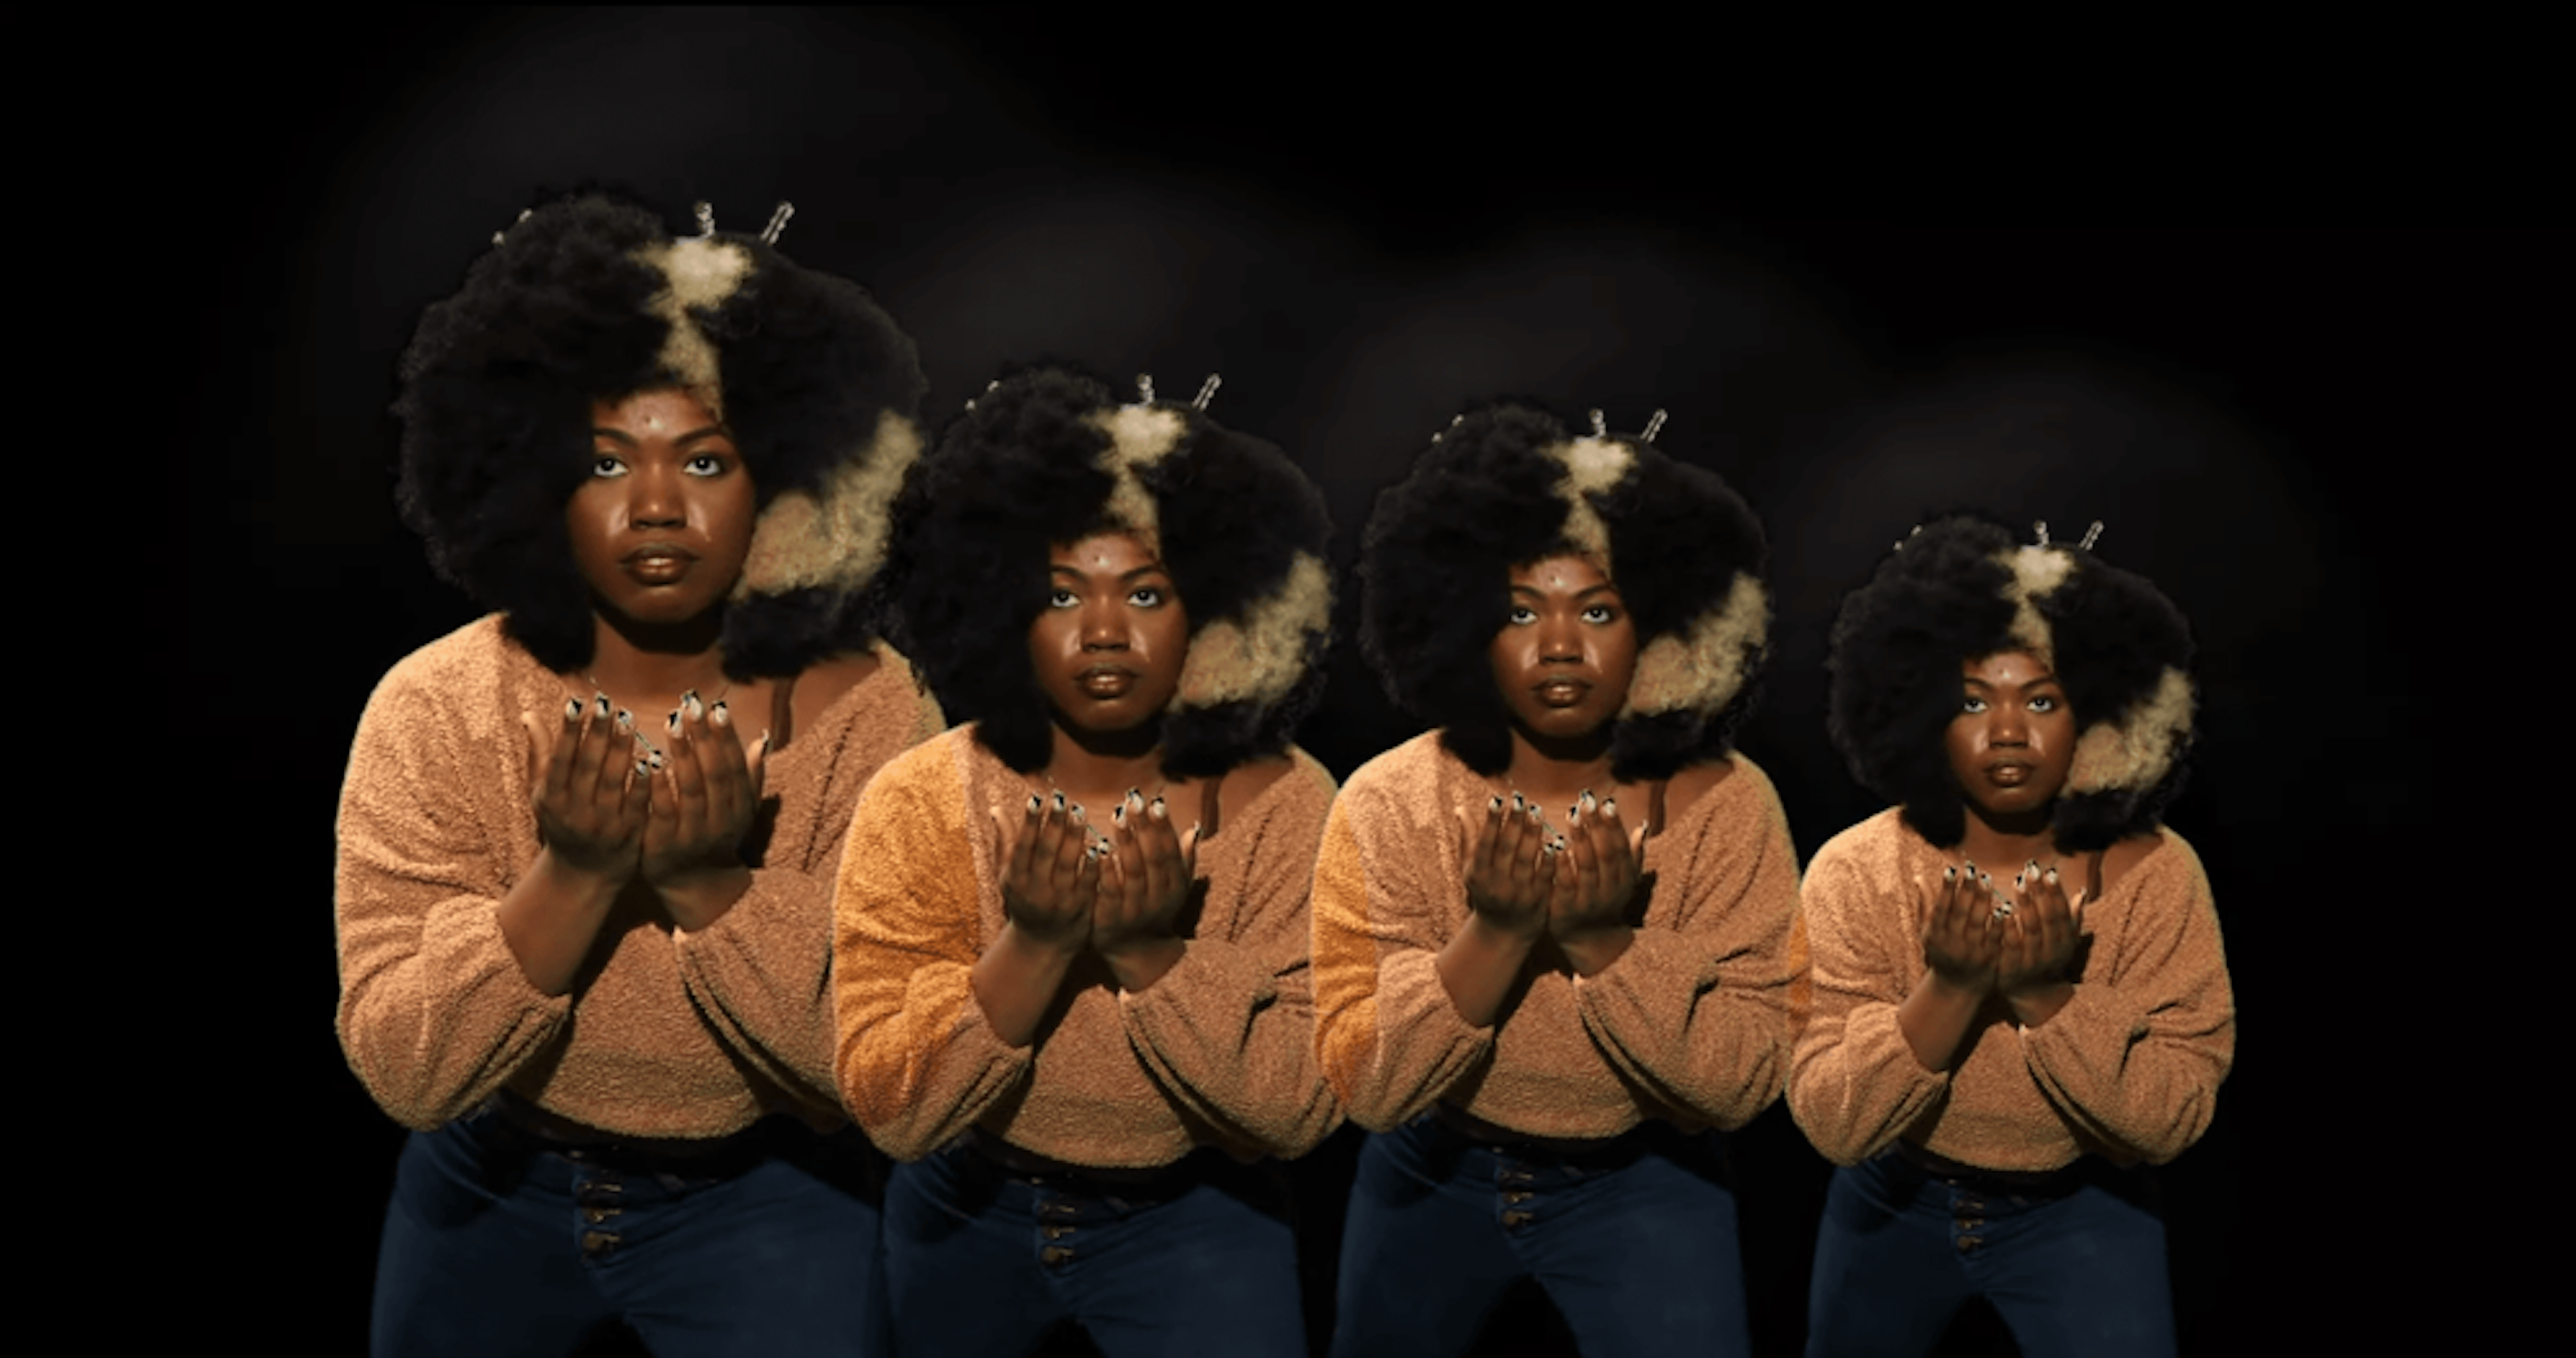 film still showing an african-american person praying repeated in four different sizes, over a black background